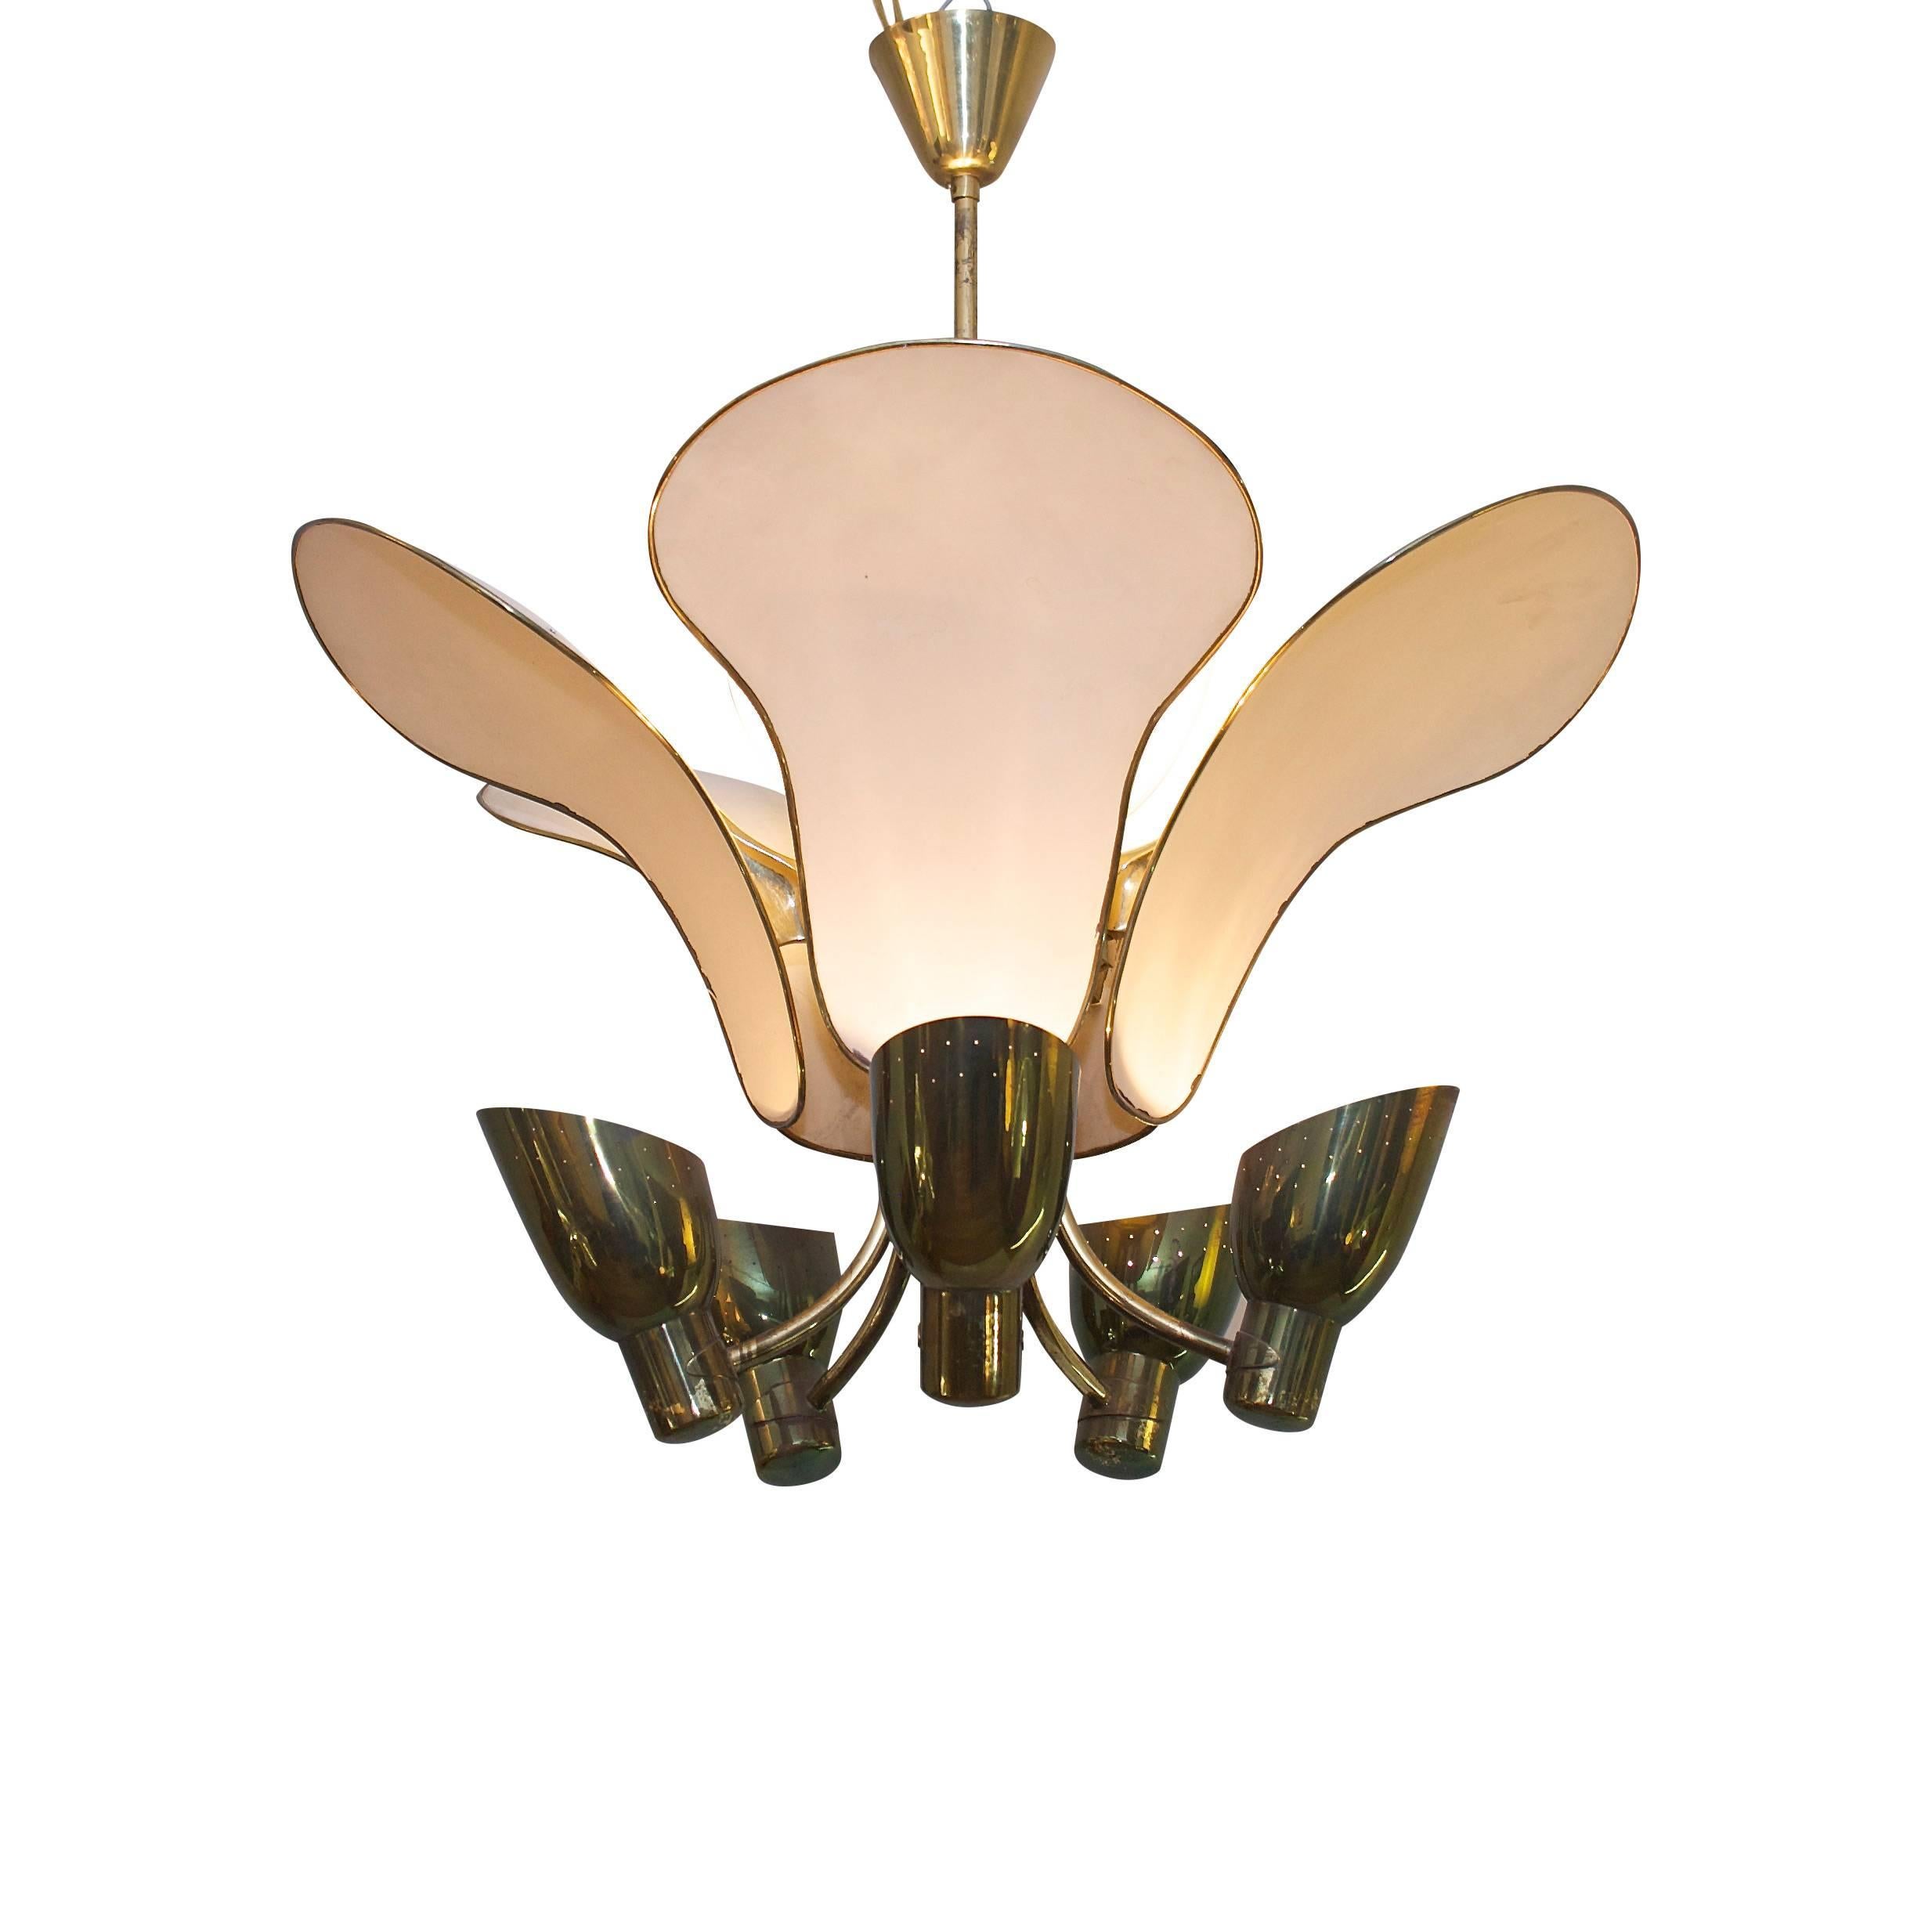 Carl Axel Acking (1910 . 2001)
Monumental Scandinavian Brass Chandelier Late 1940s. 
A very impressive Midcentury stamped hammered and polished brass chandelier with cream coloured reflectors and perforated shades. Glass insert bowl shade. In